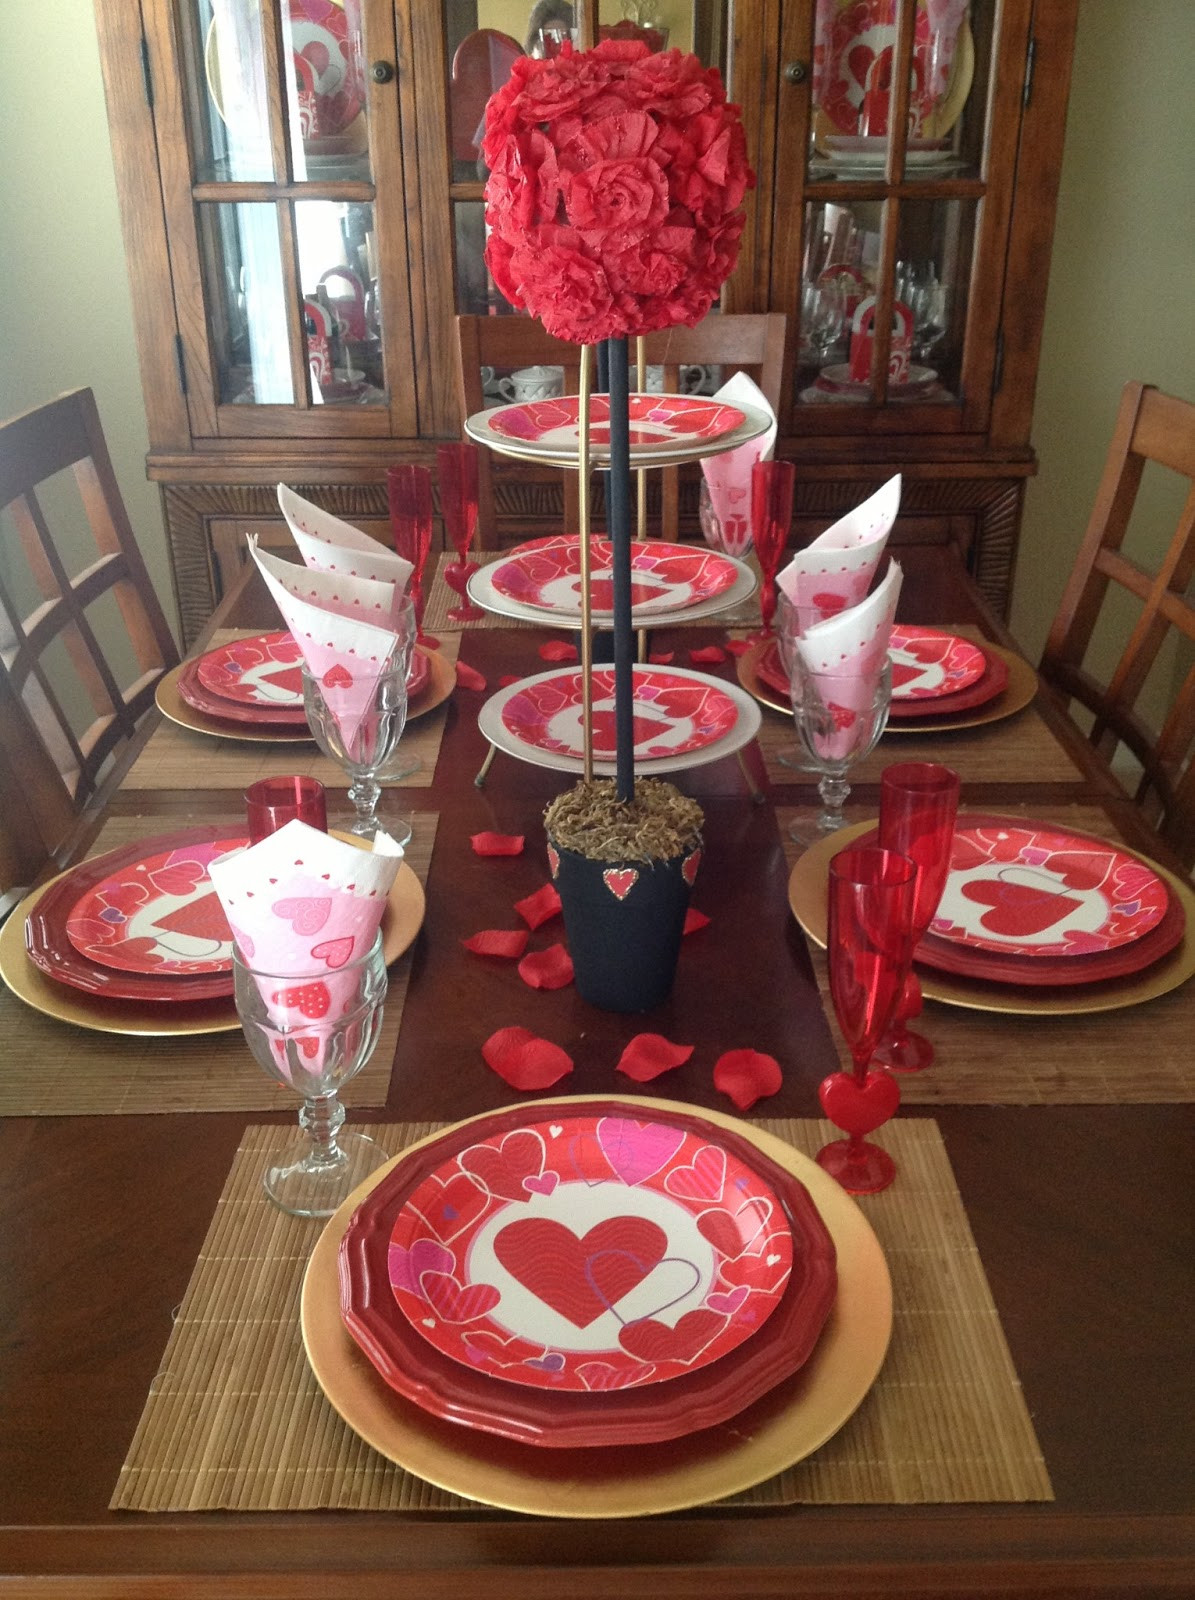 Romantic Decorating Ideas For Valentines Day
 Craft Room Secrets Valentine s day house decor